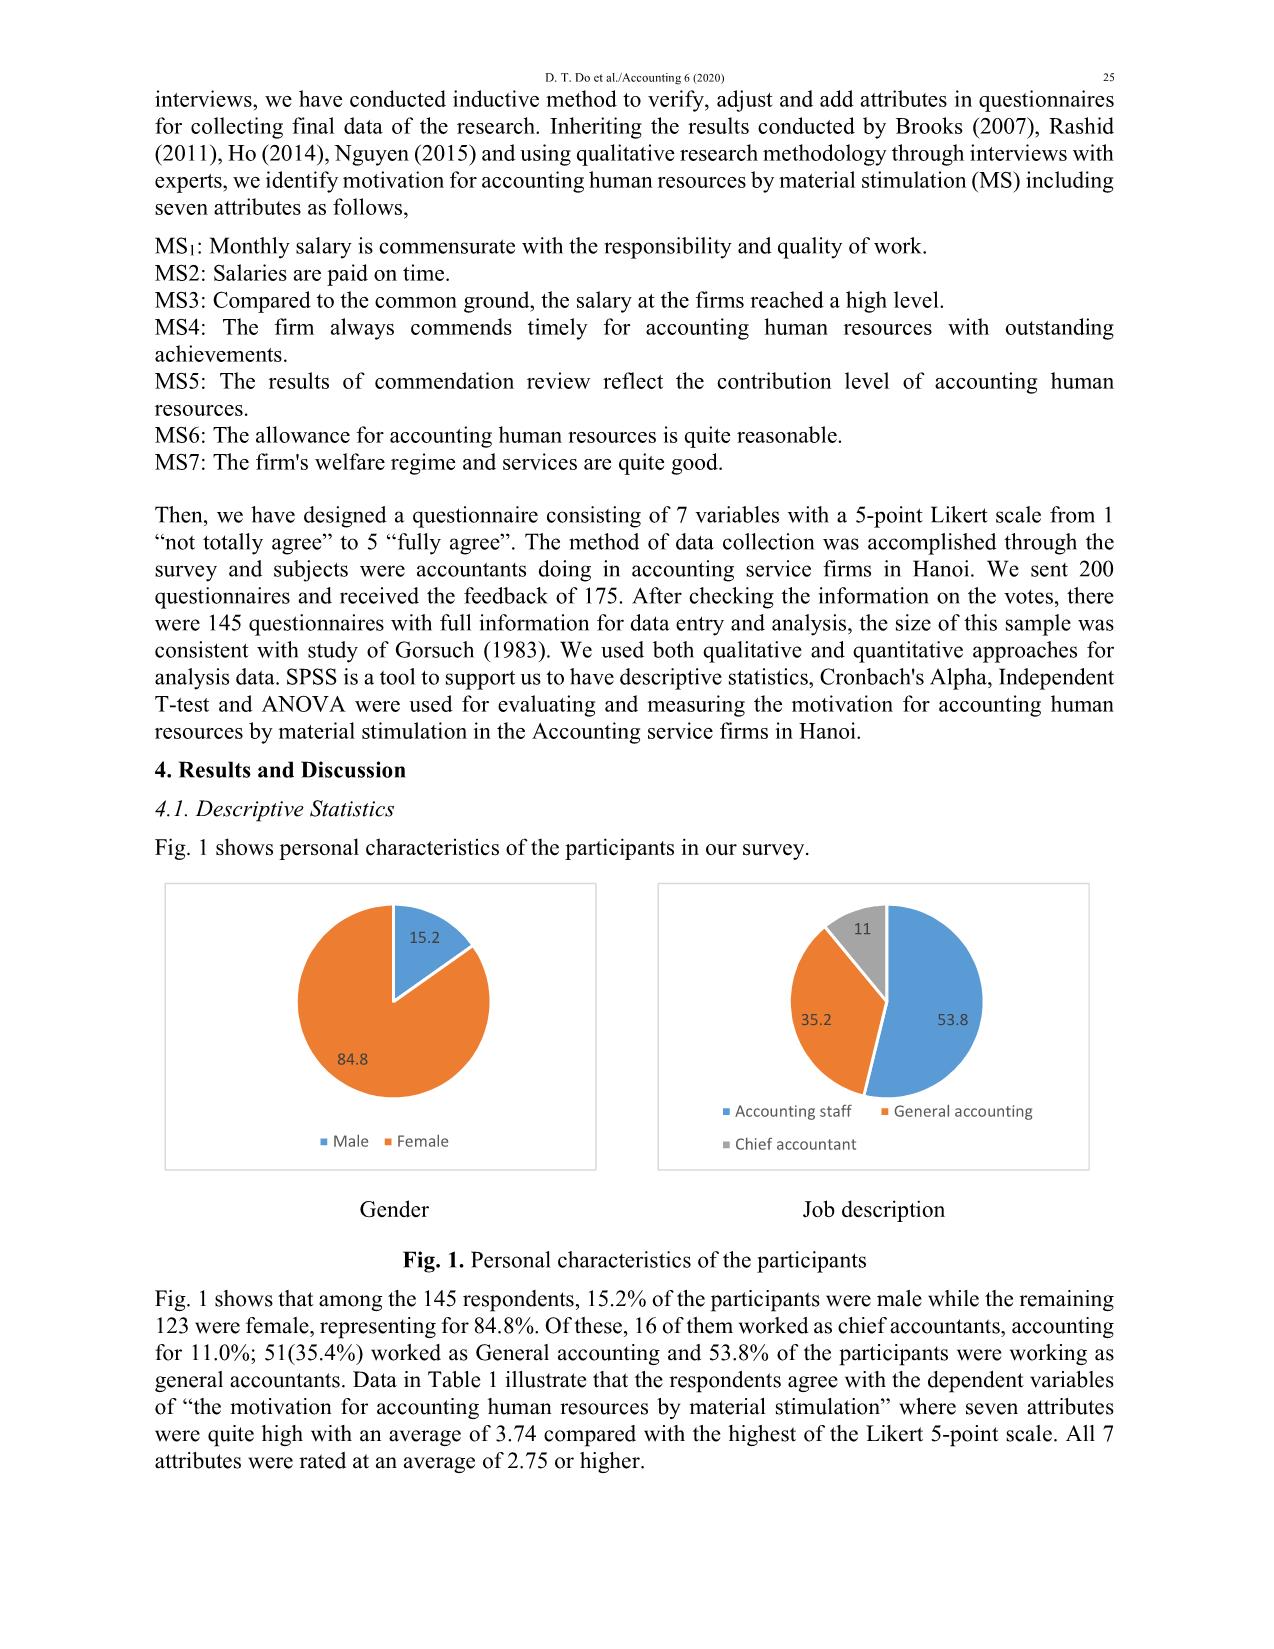 Motivation for accounting human resources by material stimulation: The case of accounting service firms in Hanoi, Vietnam trang 3